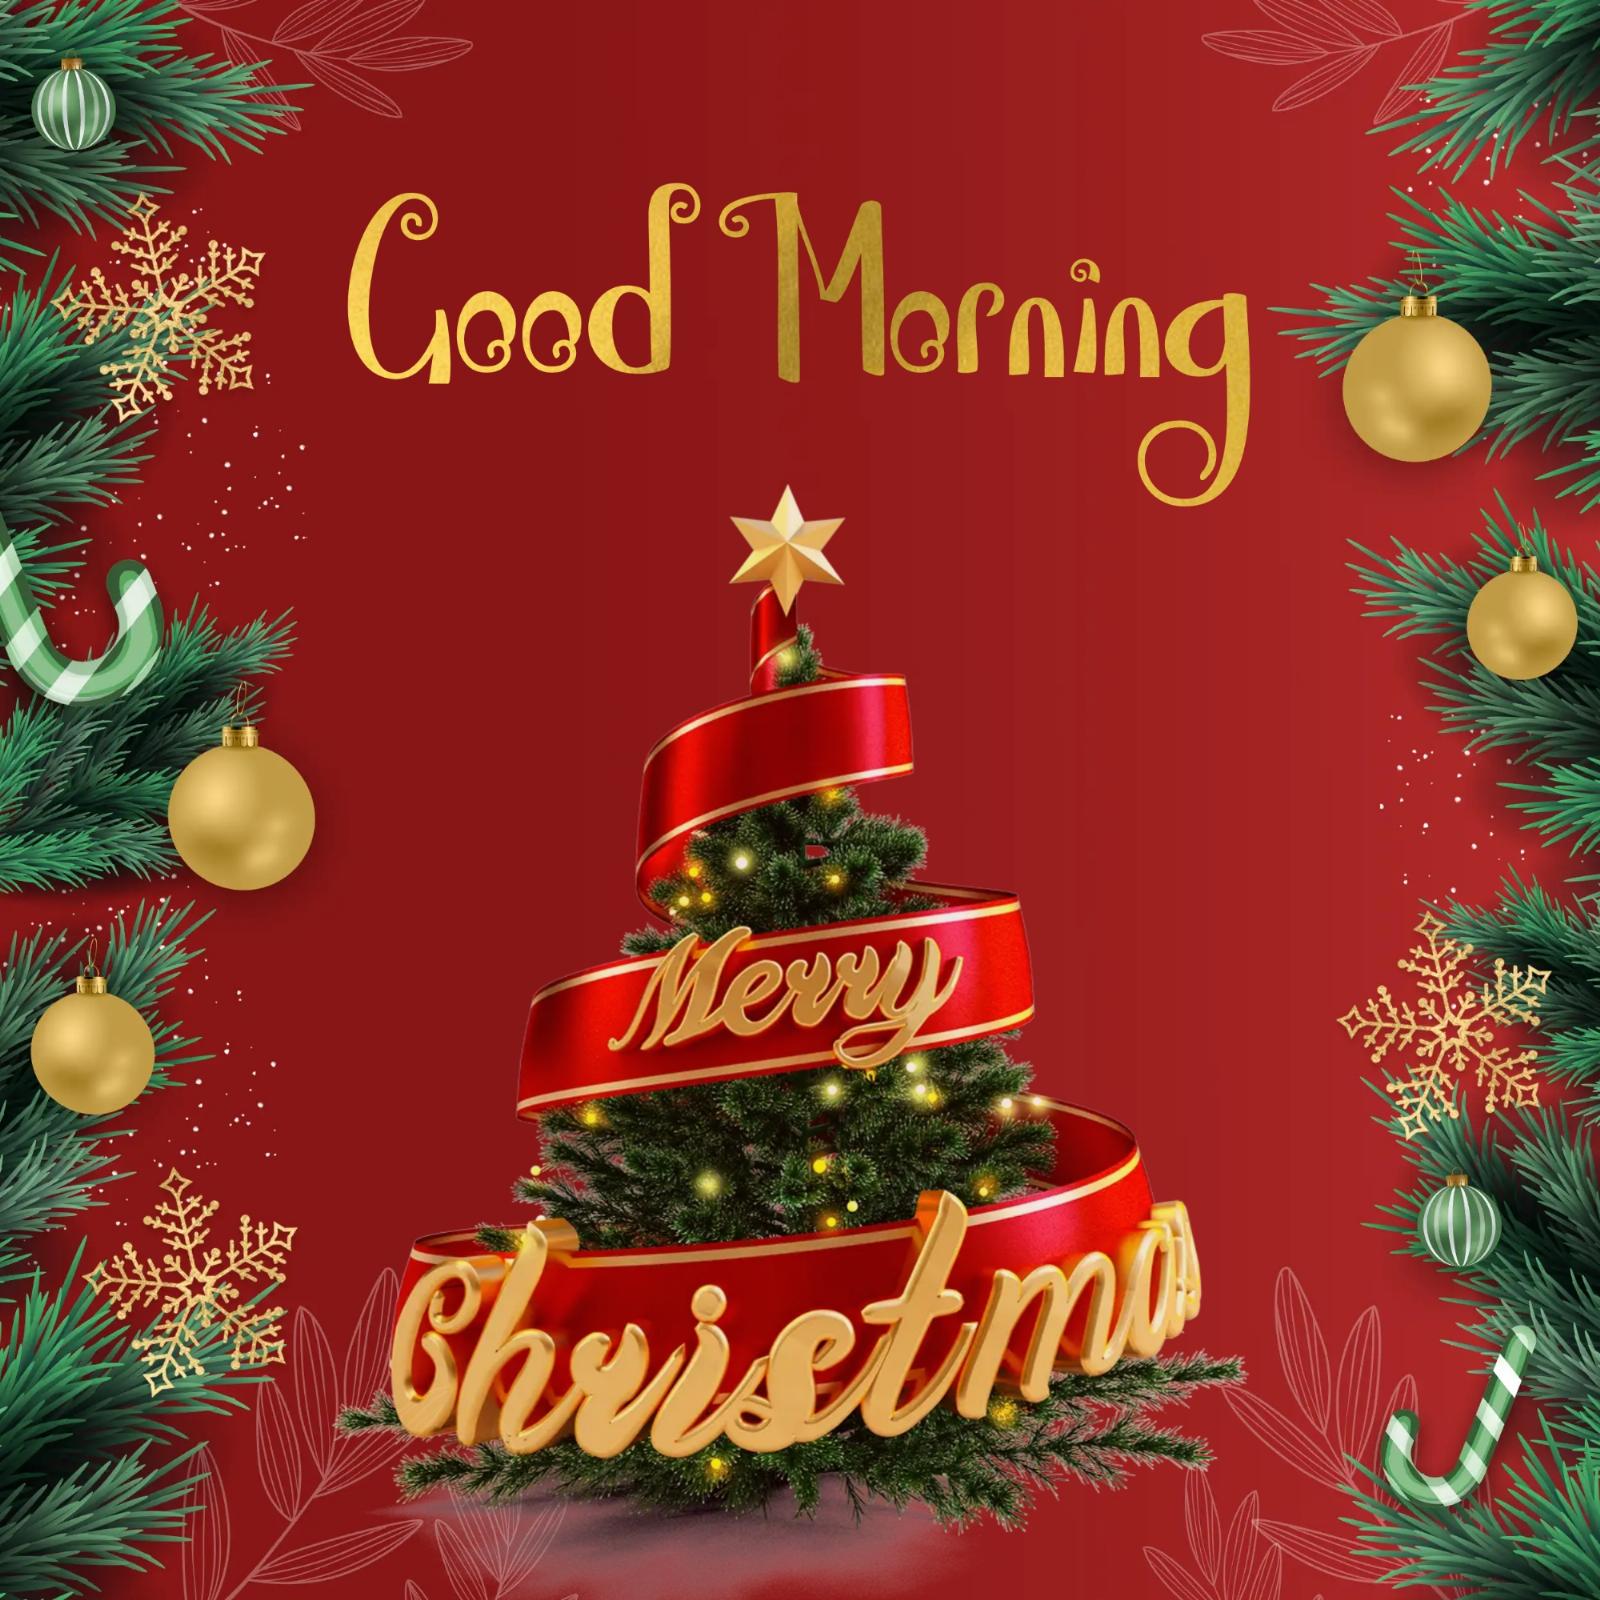 Merry Christmas Good Morning Images